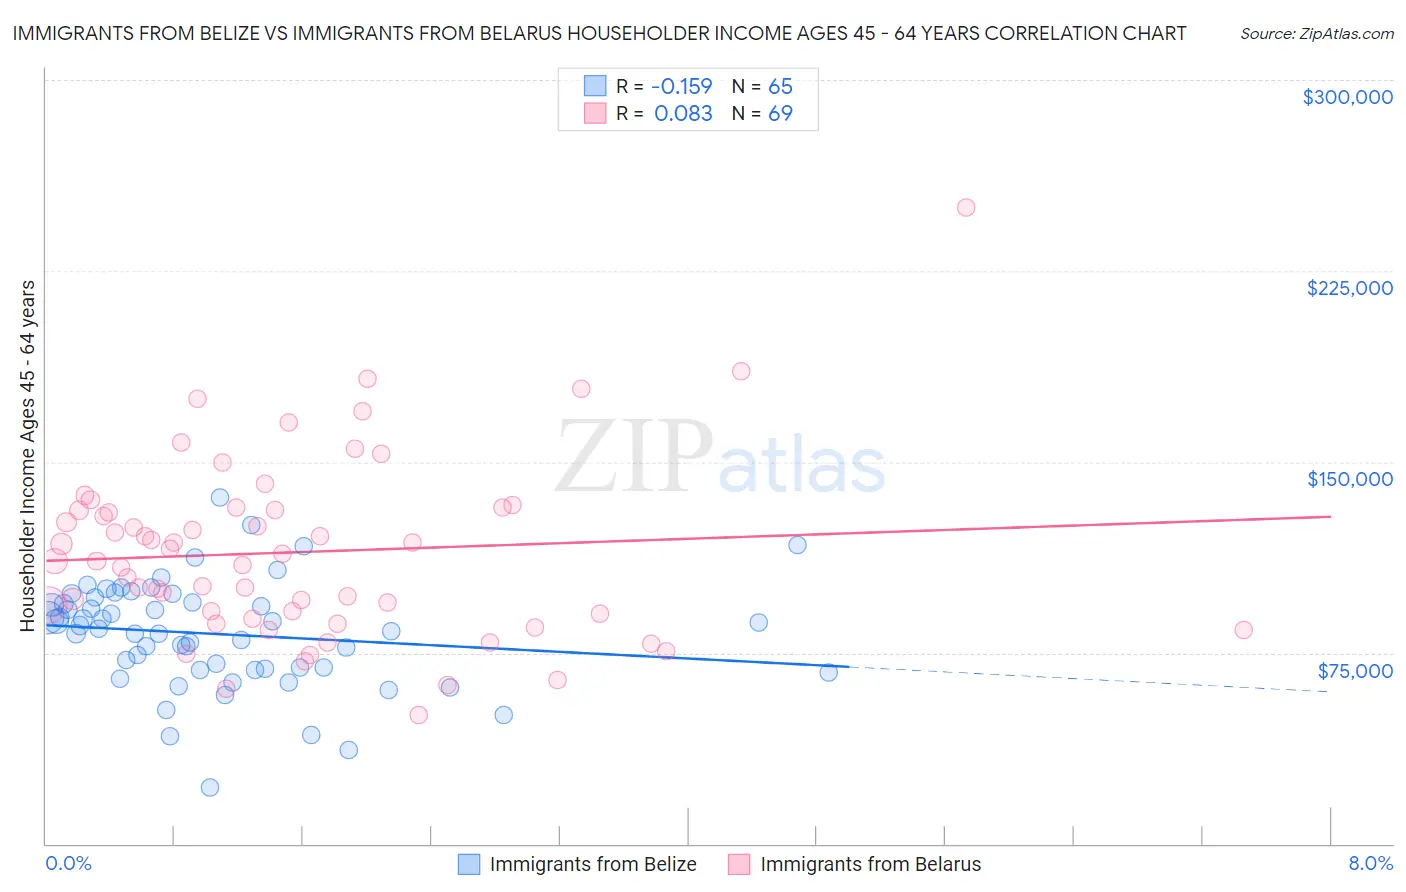 Immigrants from Belize vs Immigrants from Belarus Householder Income Ages 45 - 64 years